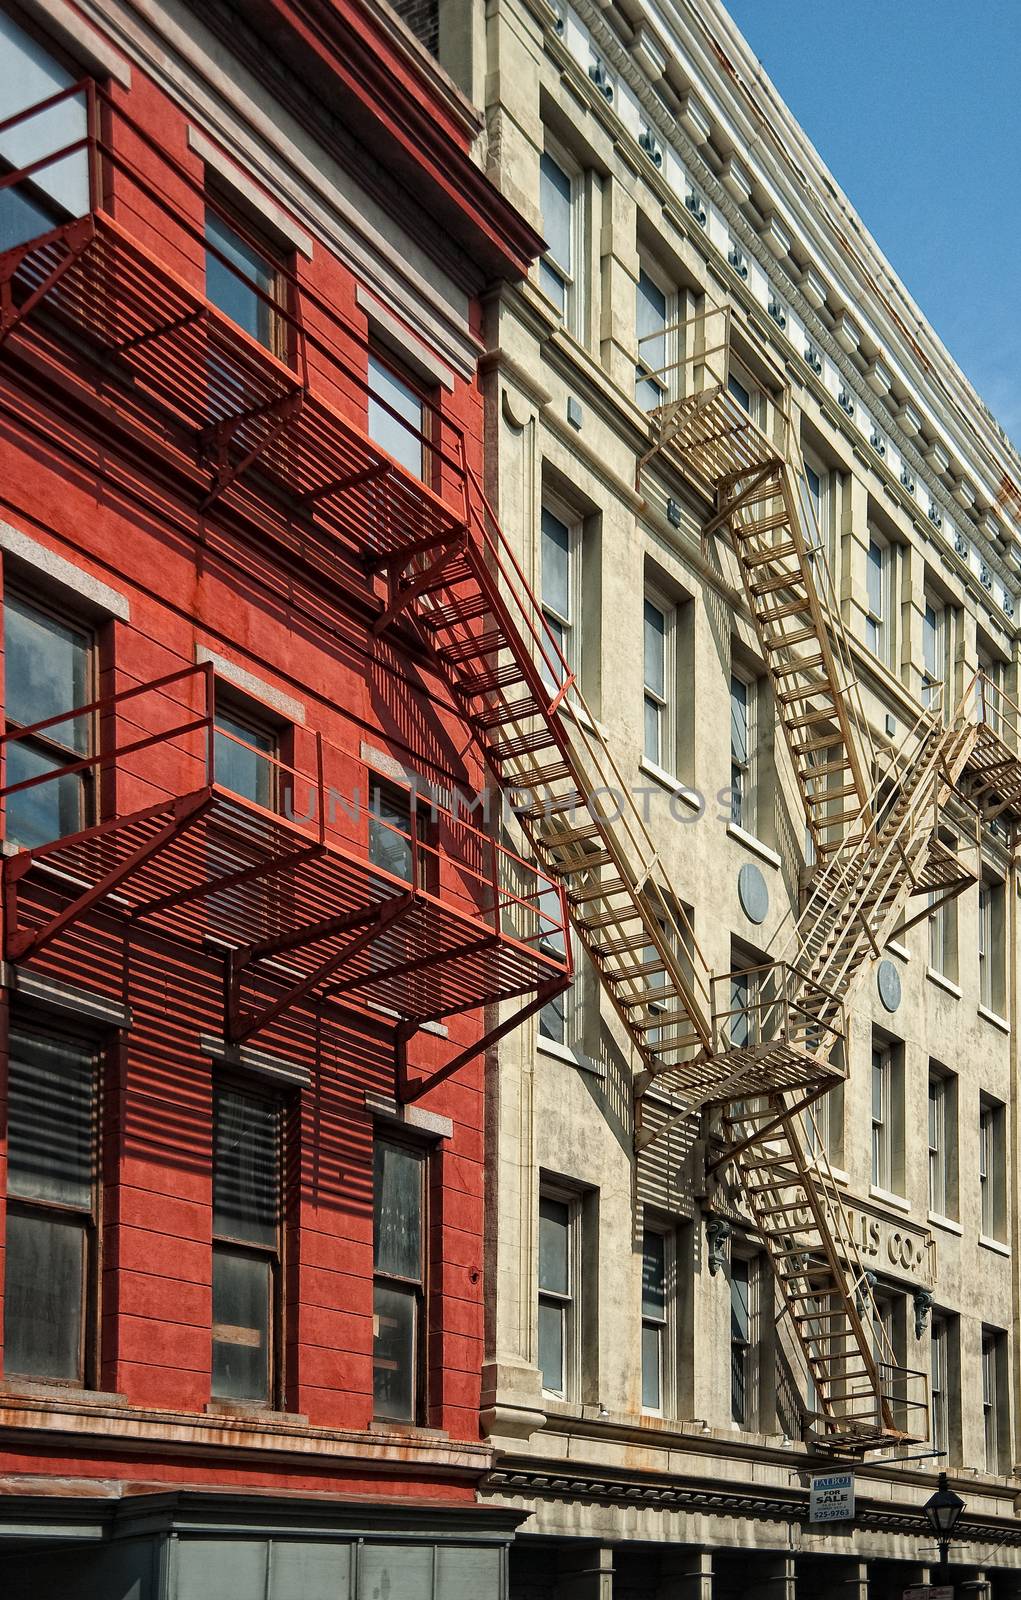 Exterior of red and tan apartment buildings in New Orleans, Louisiana with fire escapes.